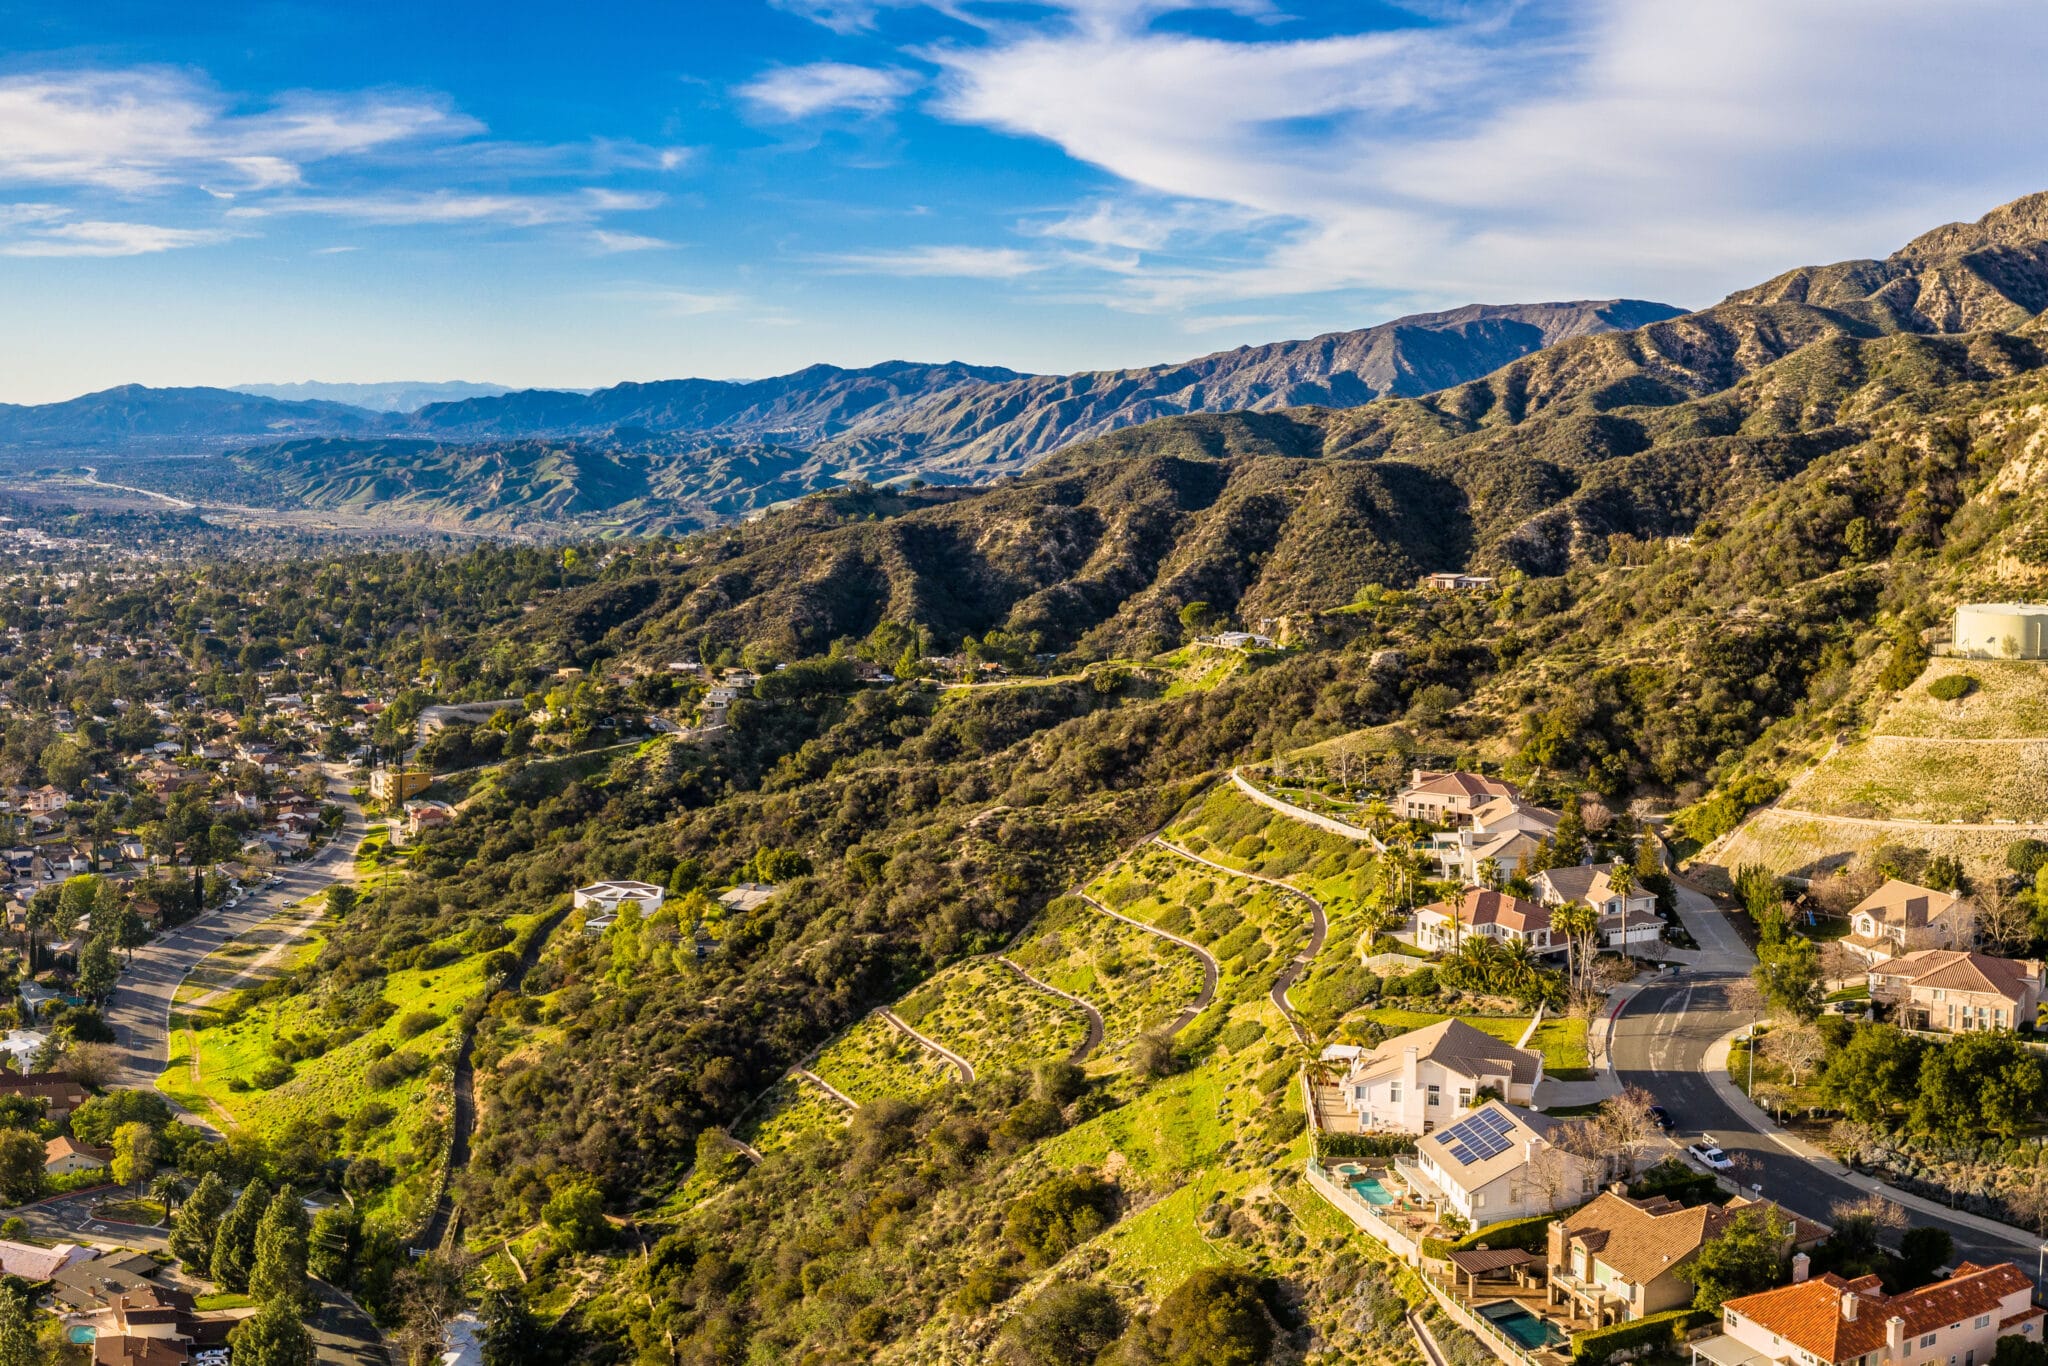 Should You Buy An Investment Property in South Pasadena, CA?